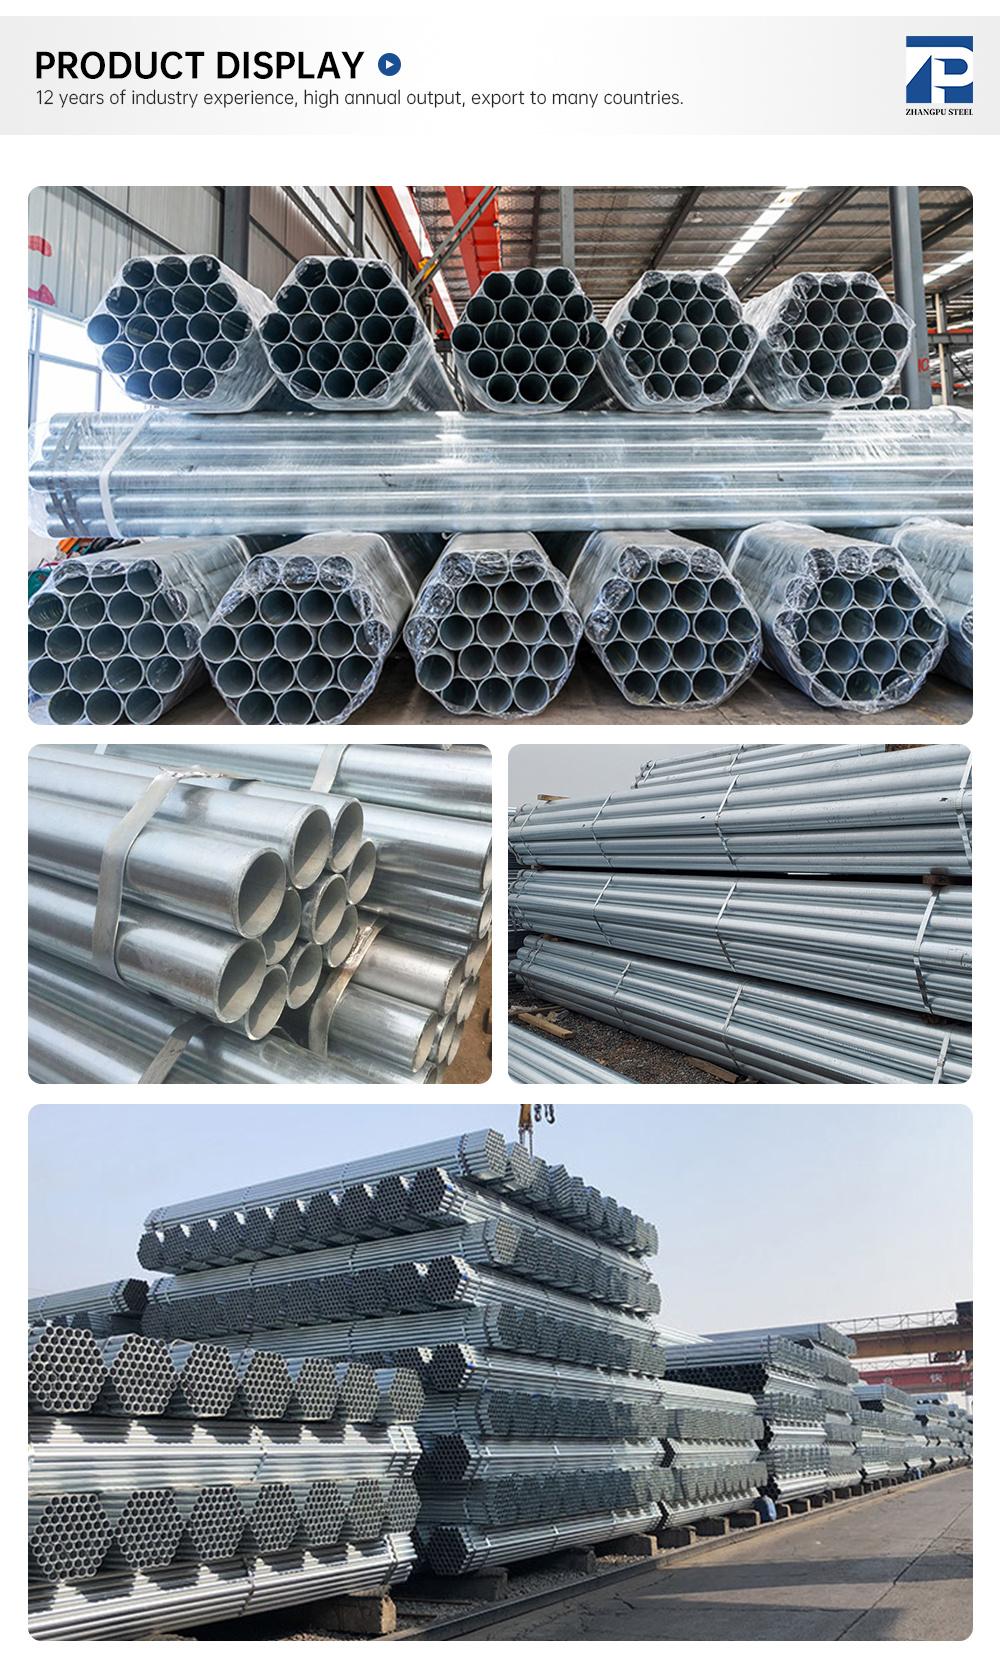 Hot Dipped Galvanized Greenhouse Frame Welded Carbon Steel Pipe Steel Floor Decking